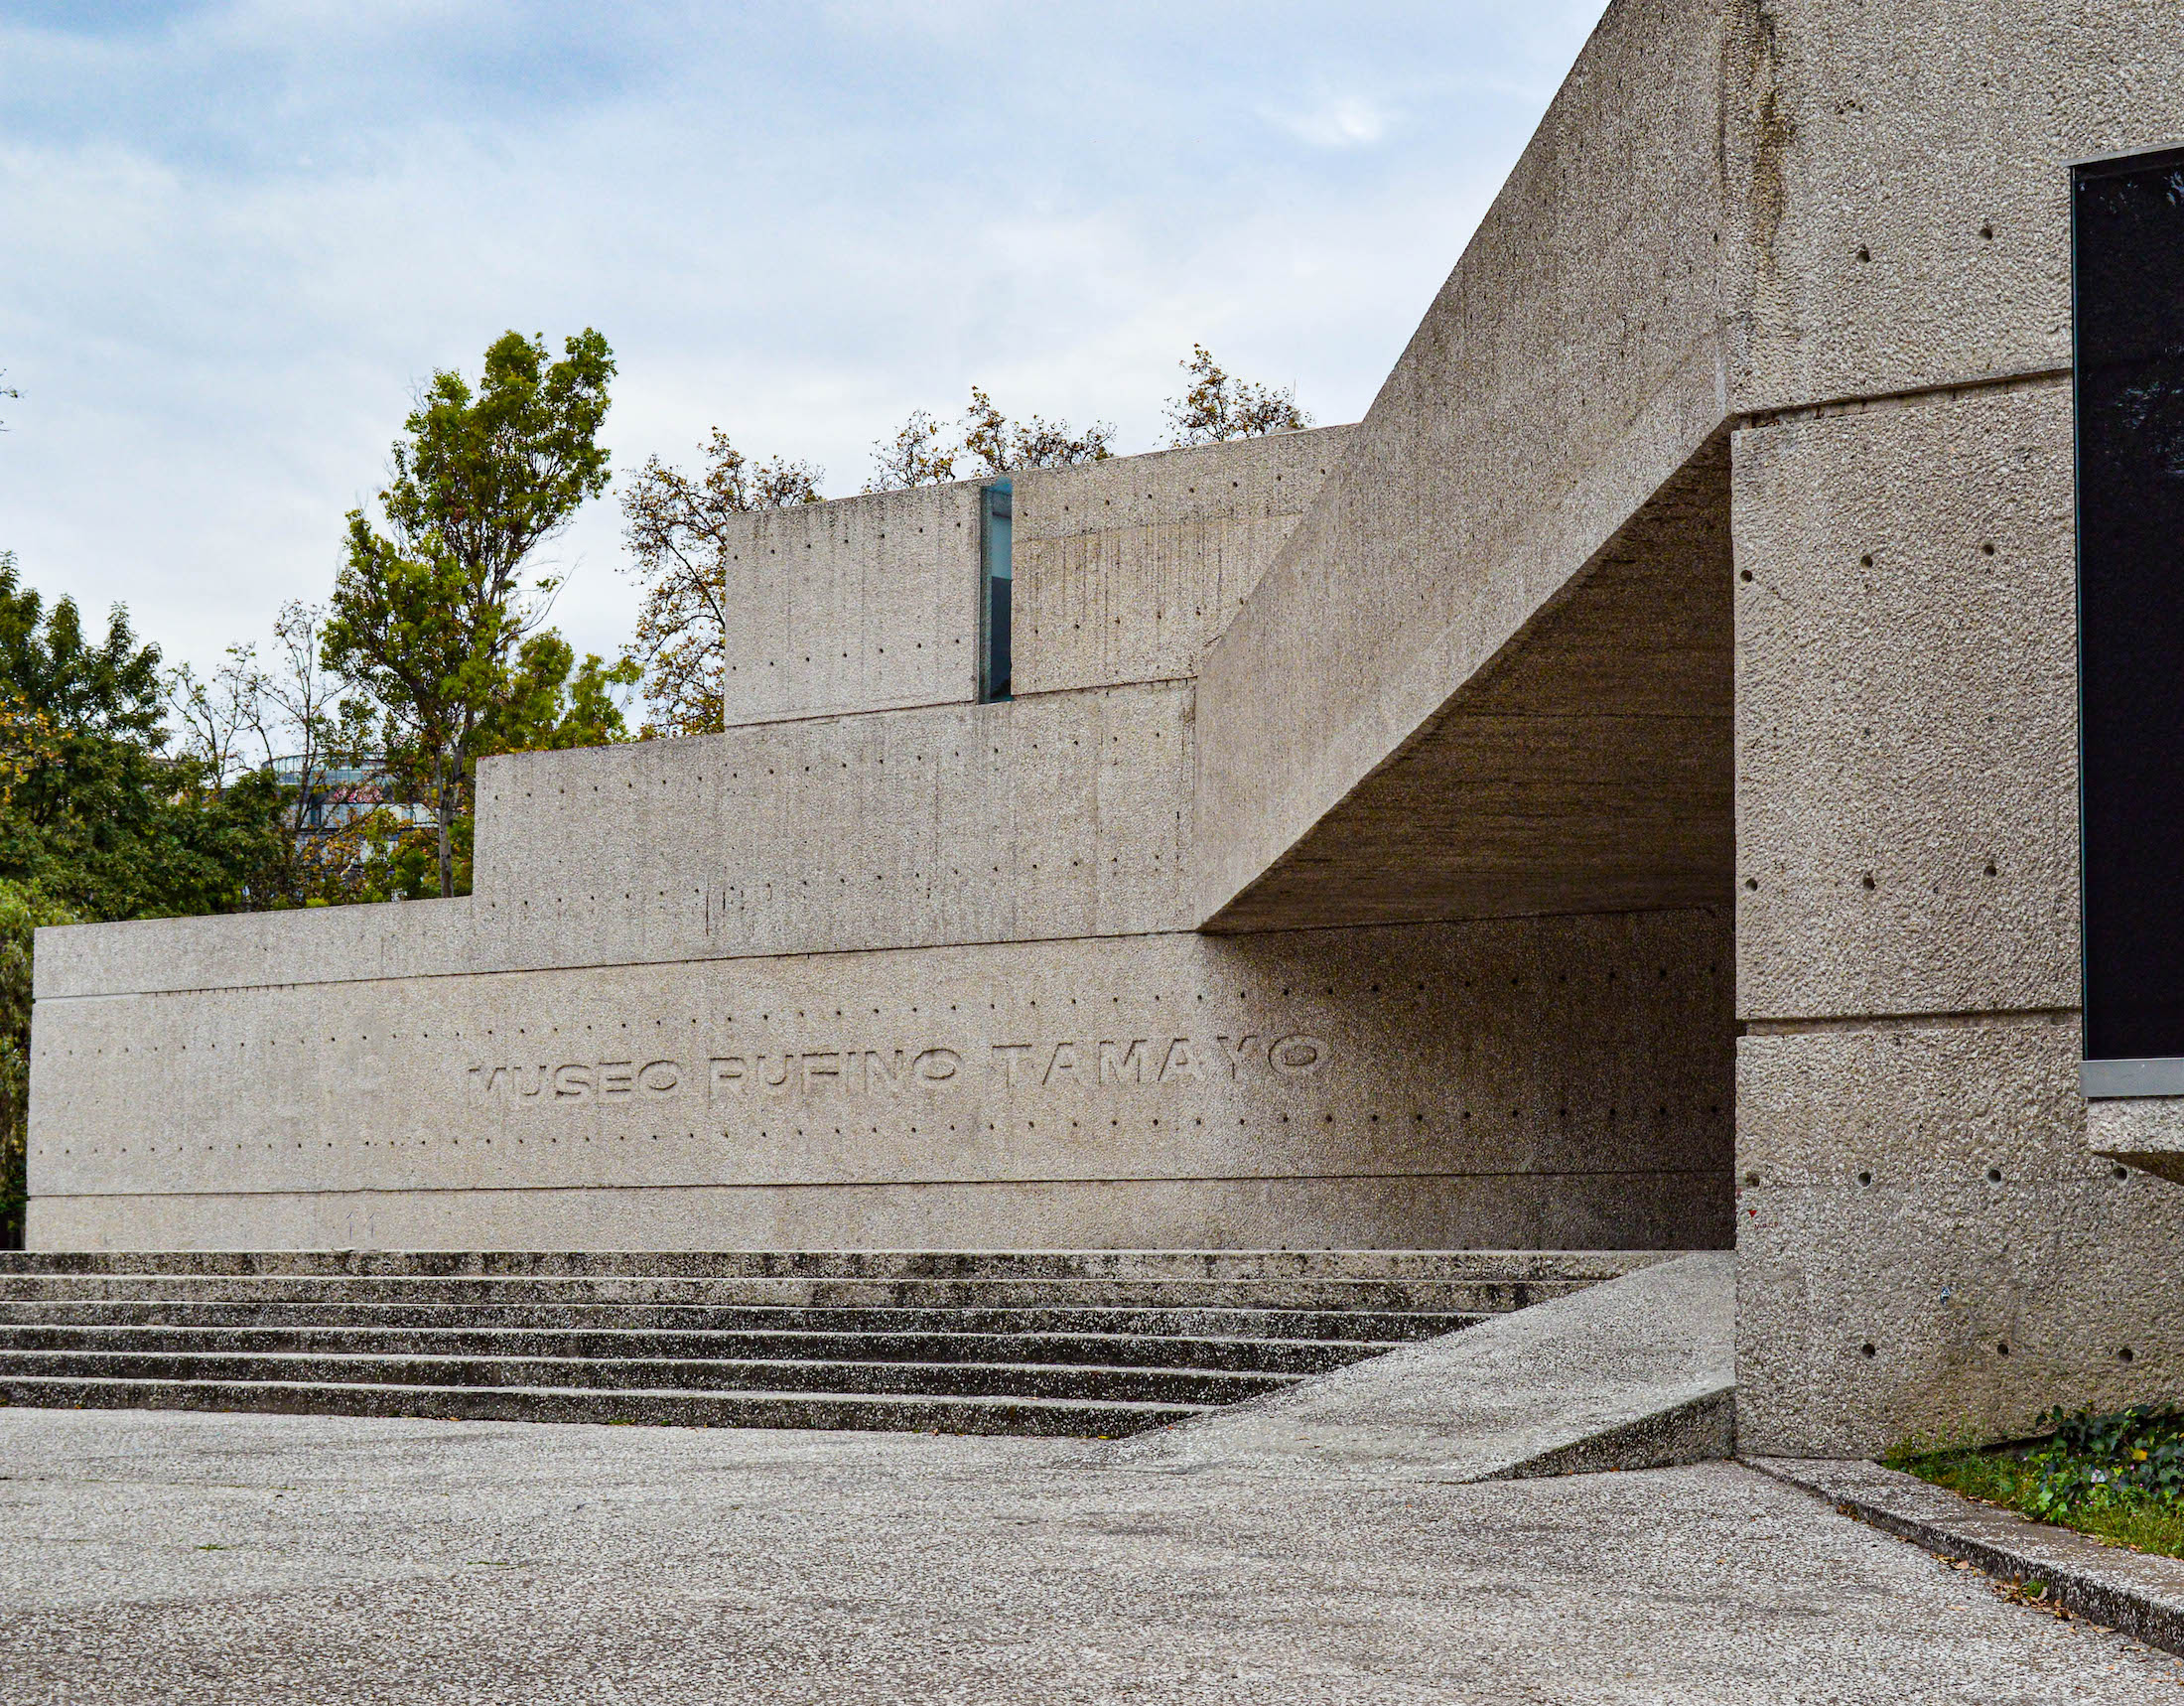 Museo Rufino Tamayo, one of many must-visit museums in Mexico city, CDMX